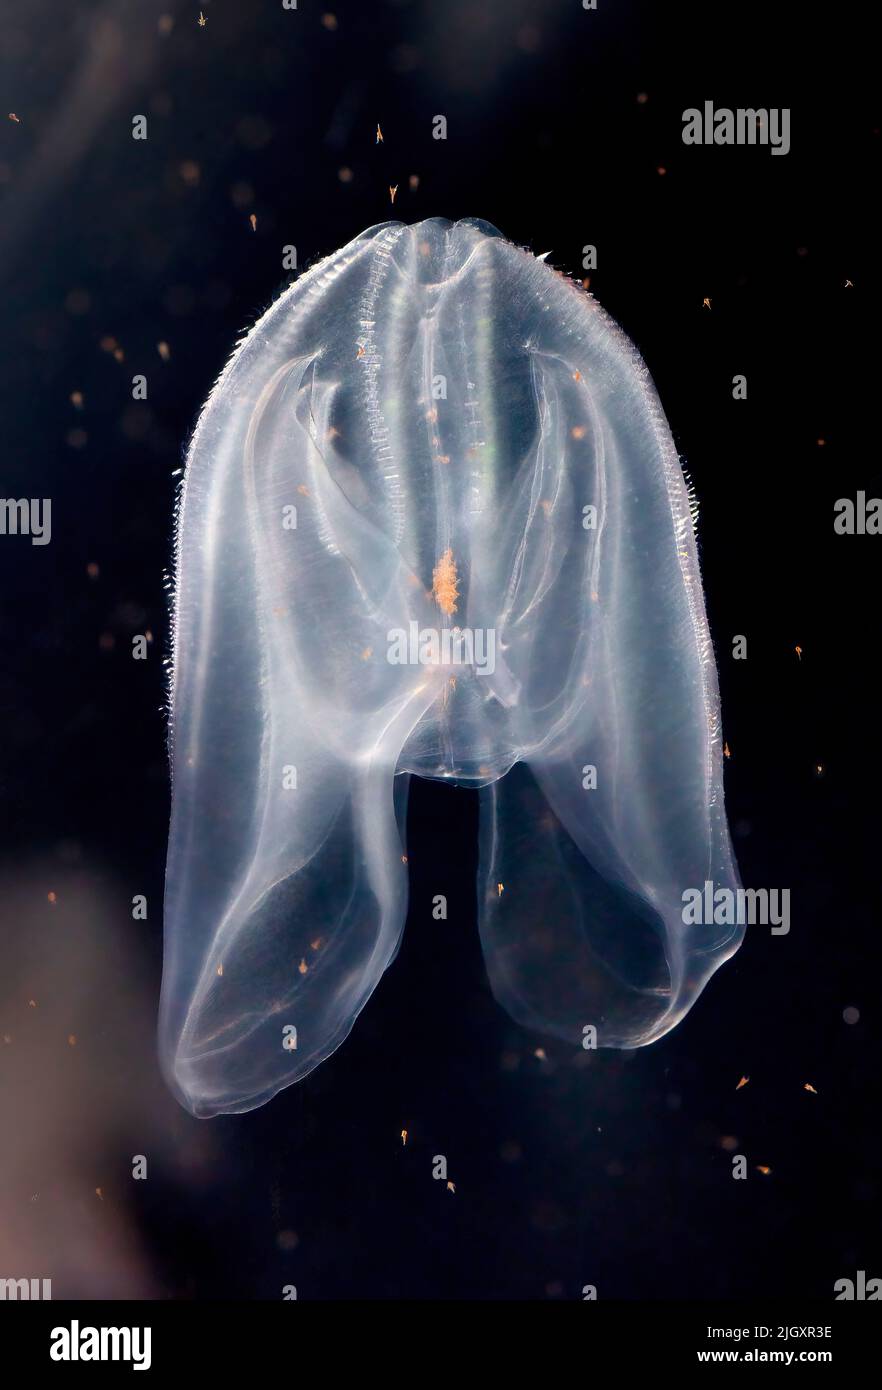 Comb Jelly, Mnemiopsis leidyi, Pacific Ocean Stock Photo